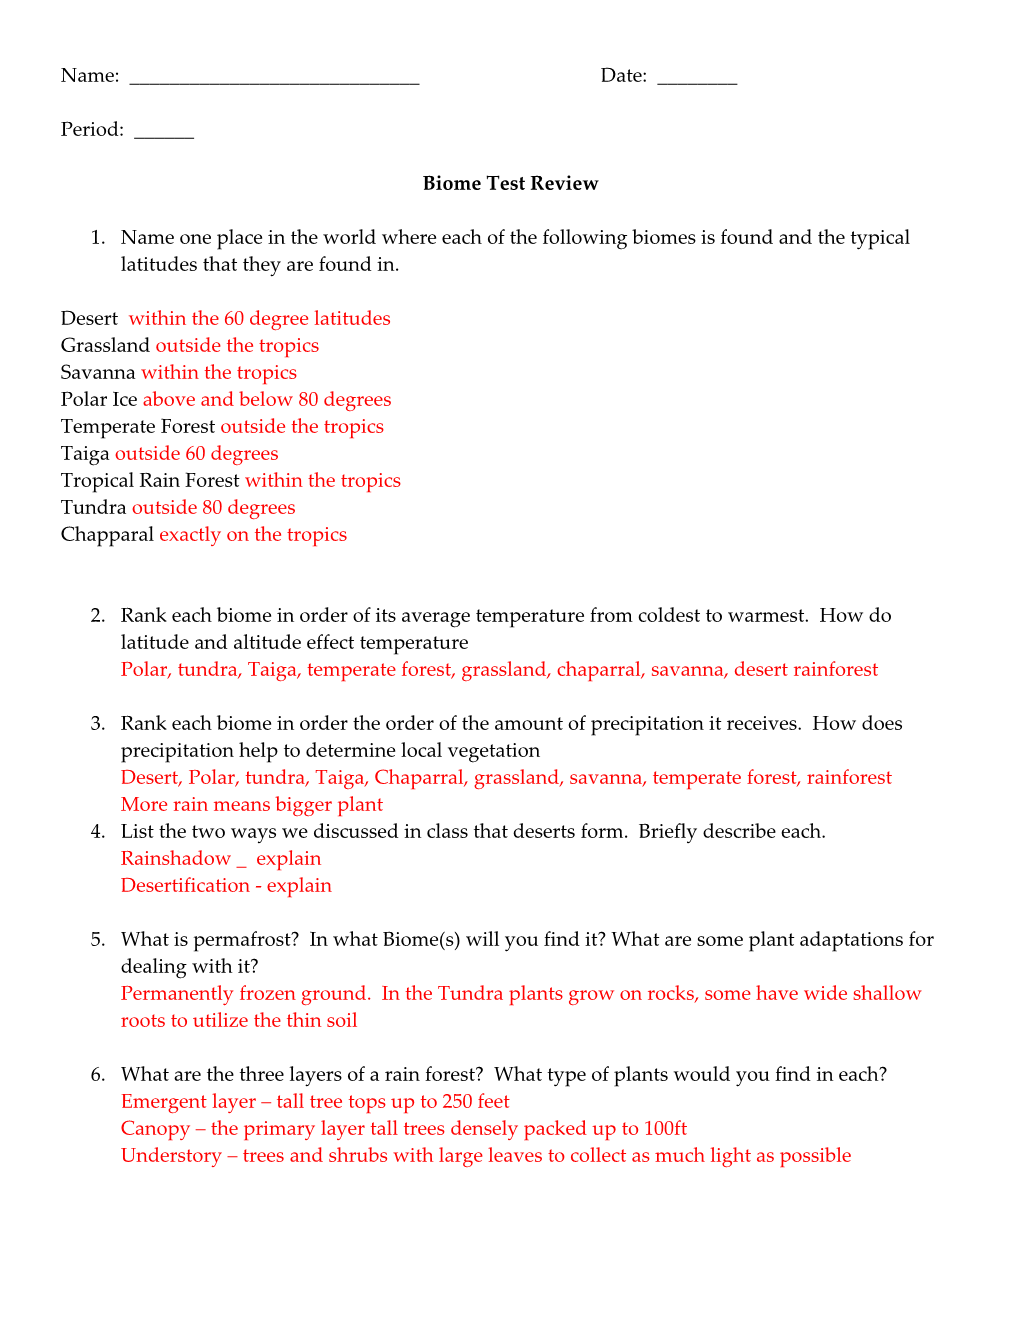 Biome Test Review